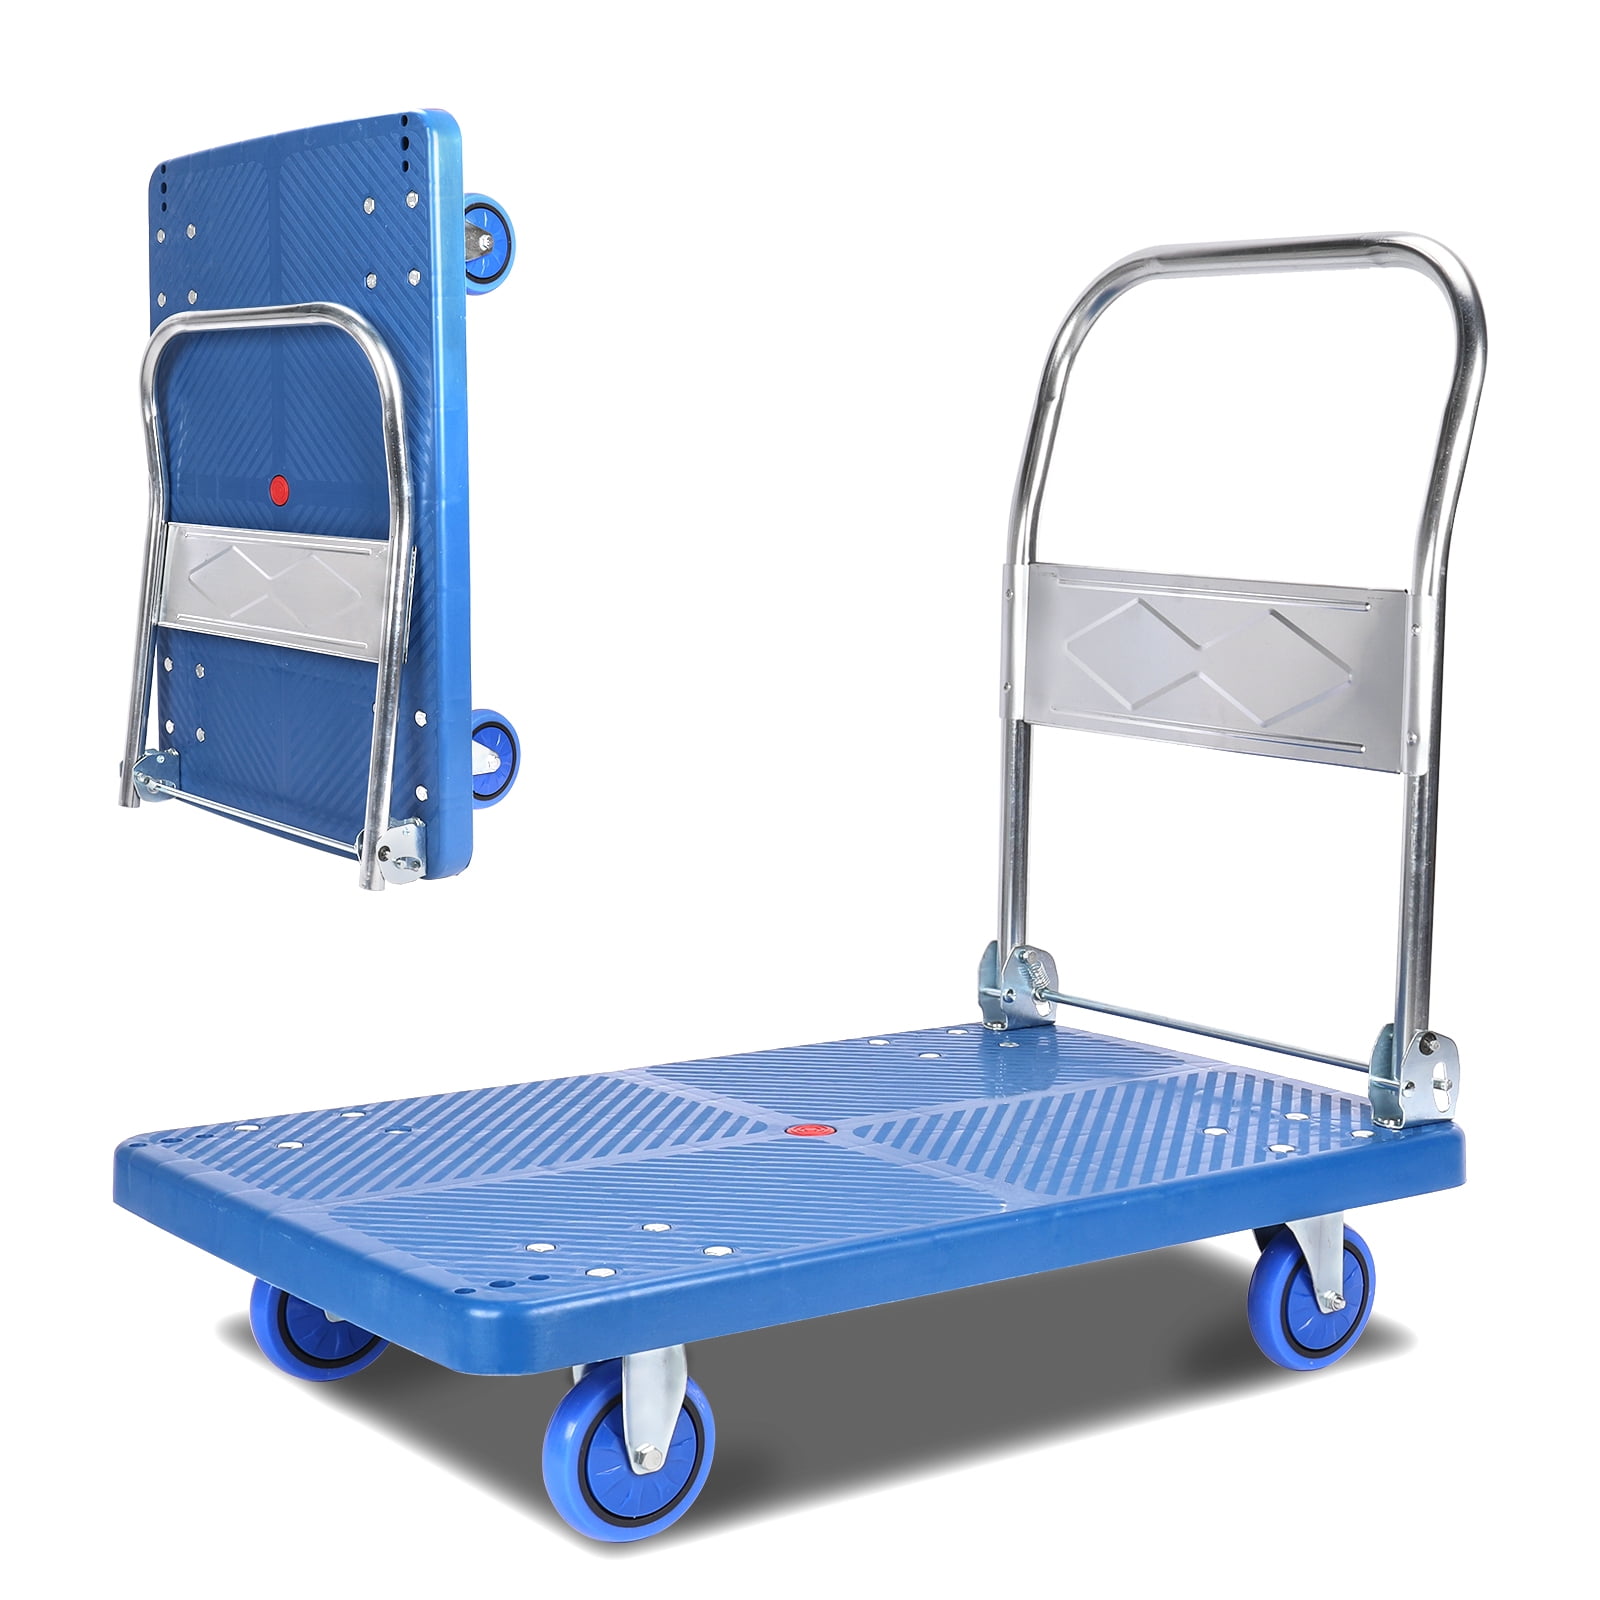 Wheeled Furniture Mover Dolly, Multi Purpose Roller for Moving Heavy Objects With 440 lb Weight Capacity